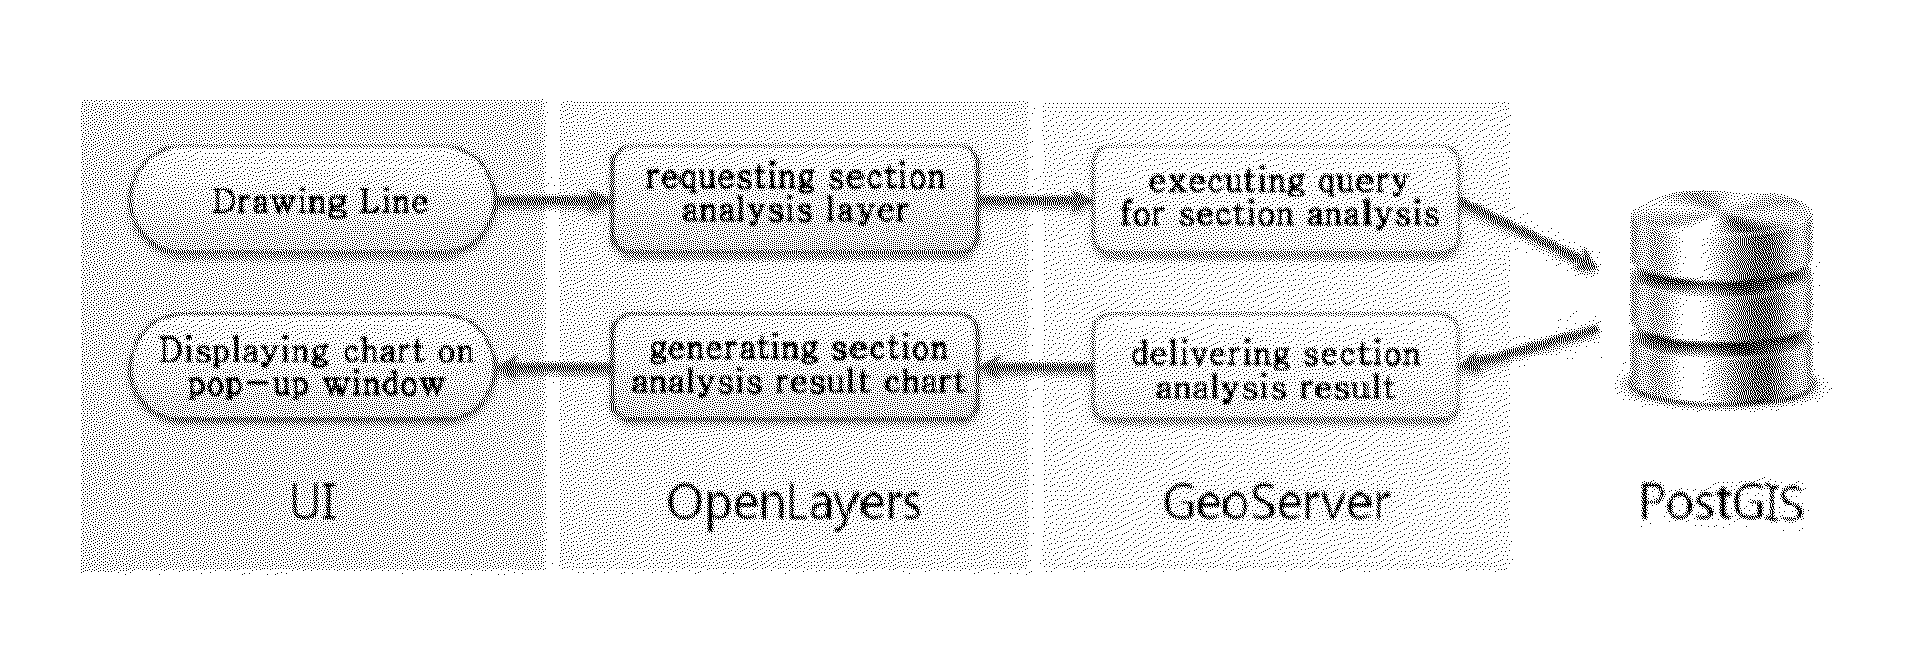 Method for analyzing 2-dimensional geothermal resource data using web-based 3-dimensional sectional view